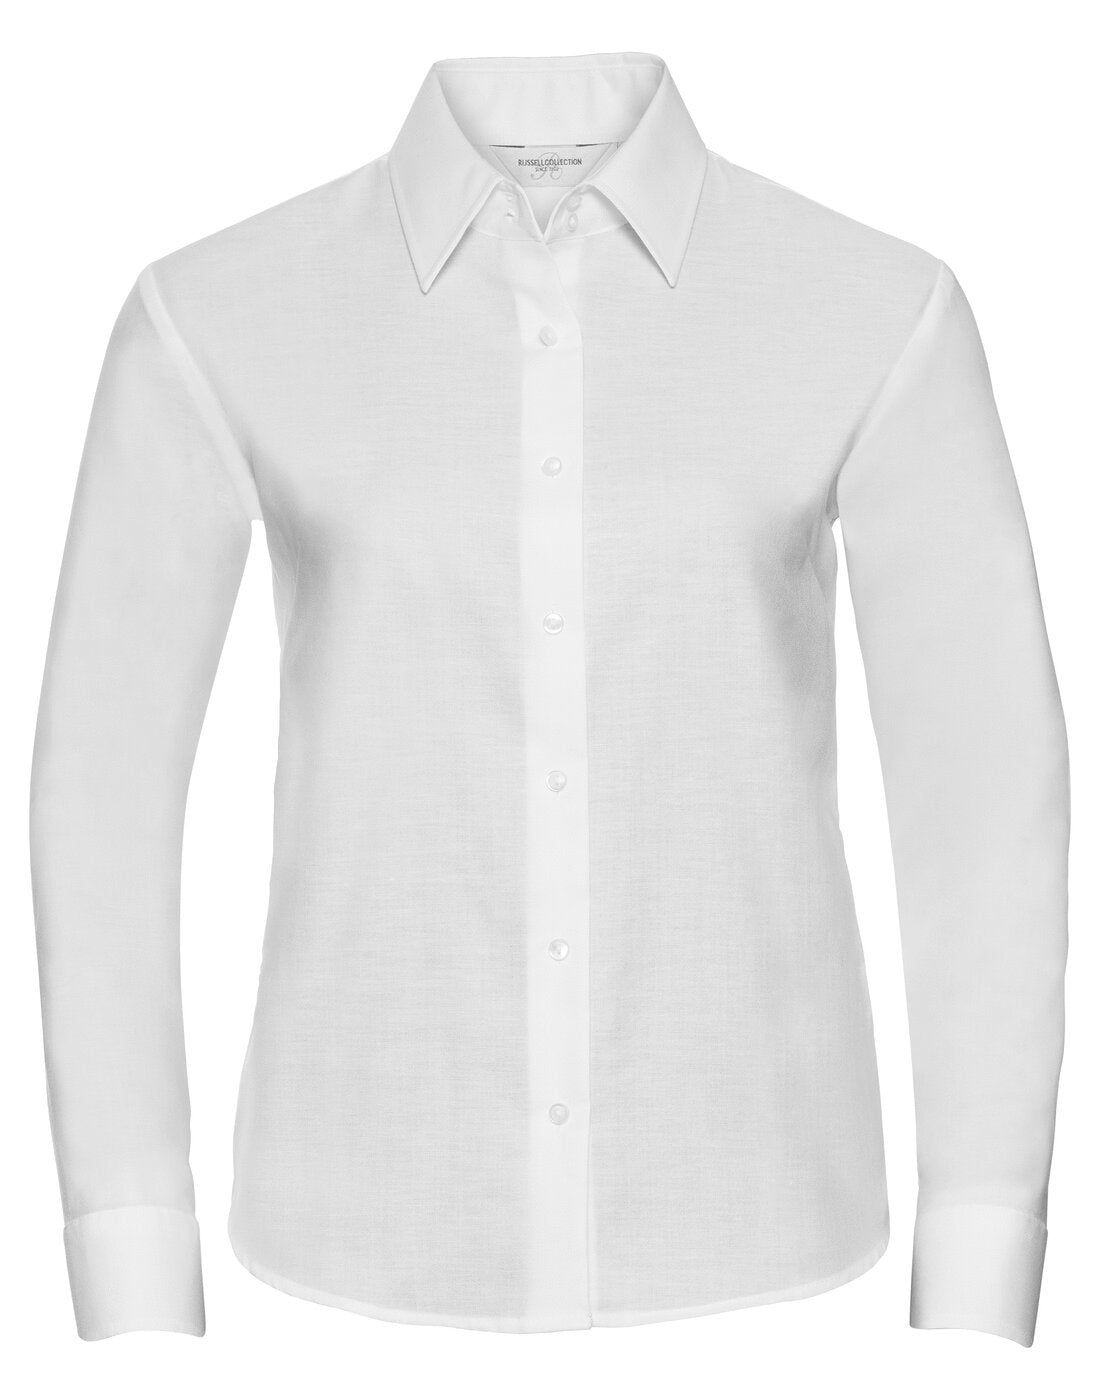 Russell Ladies Long Sleeve Tailored Oxford Shirt White